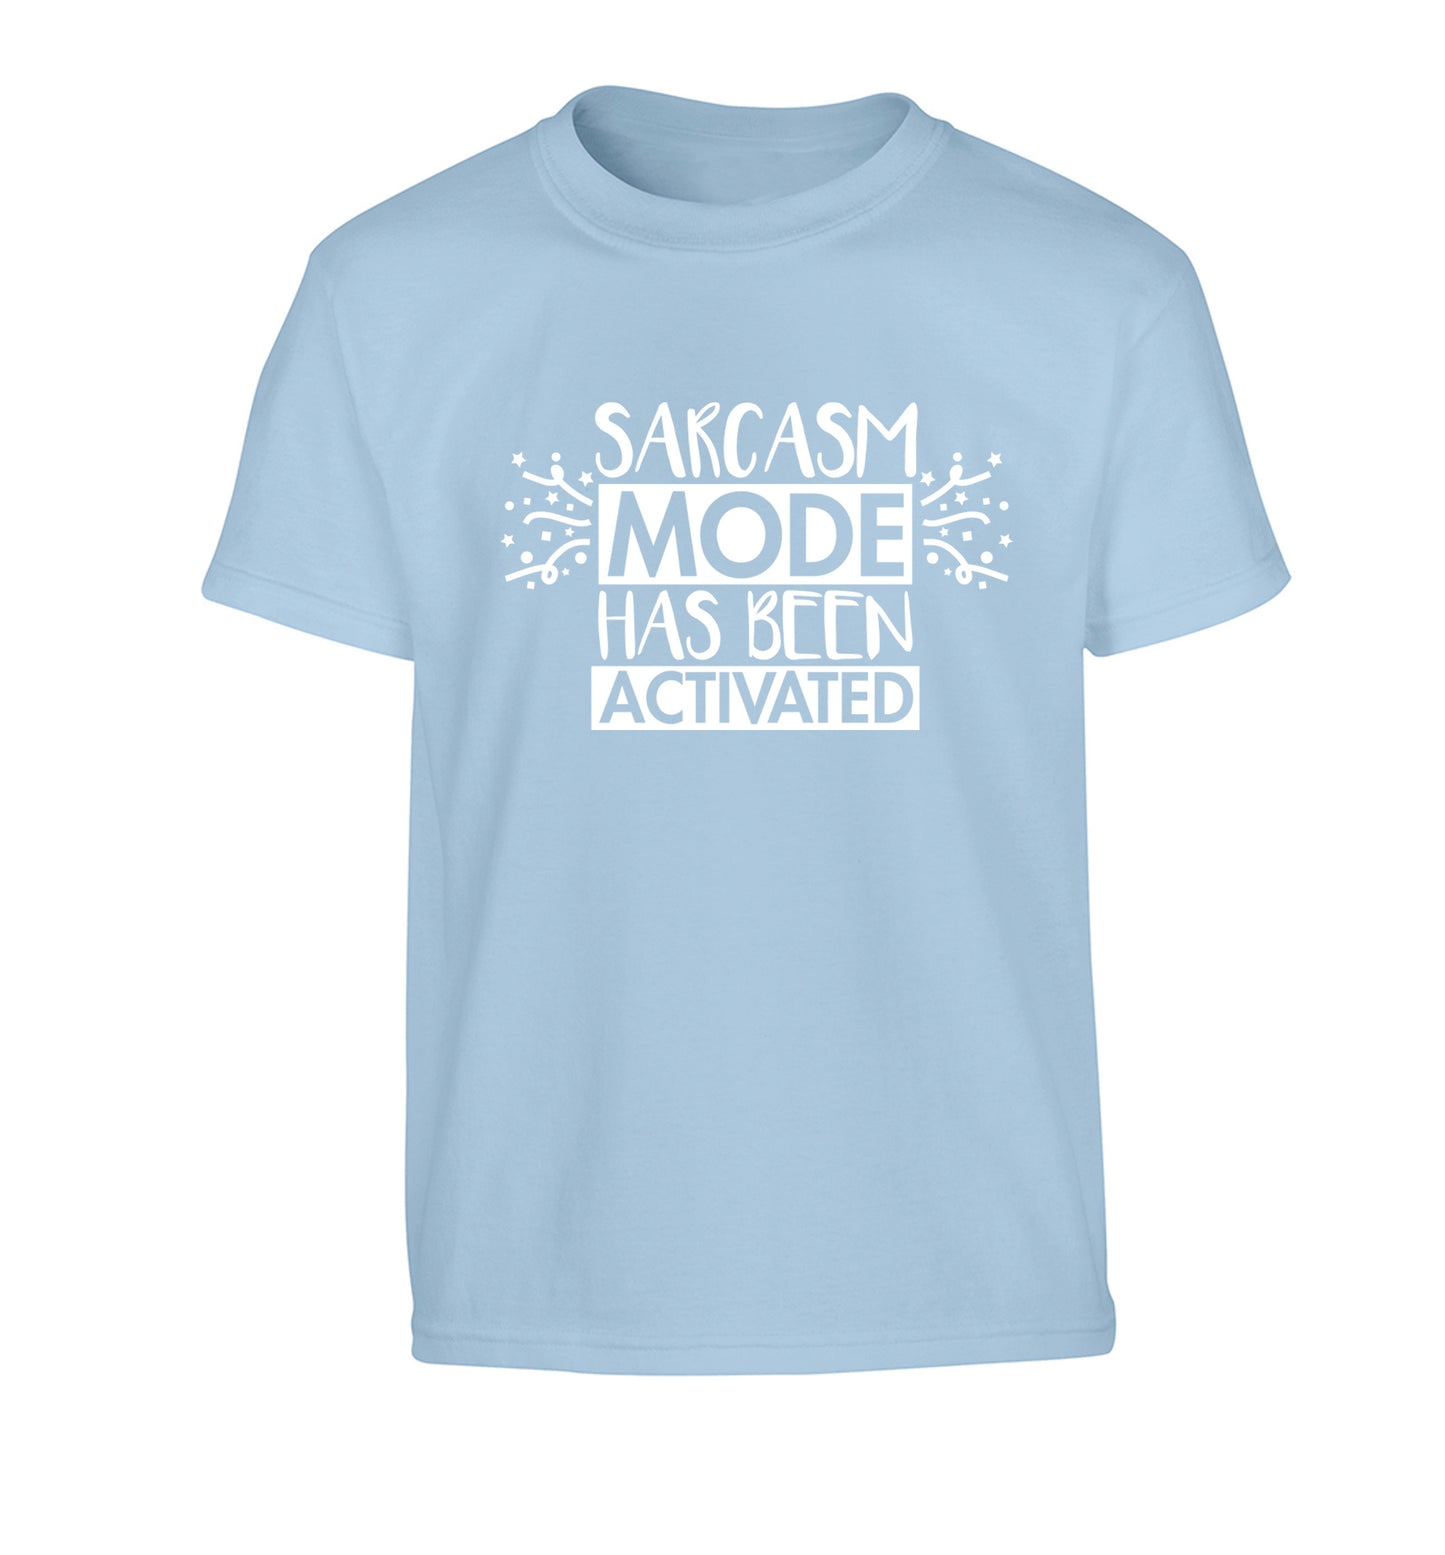 Sarcarsm mode has been activated Children's light blue Tshirt 12-14 Years